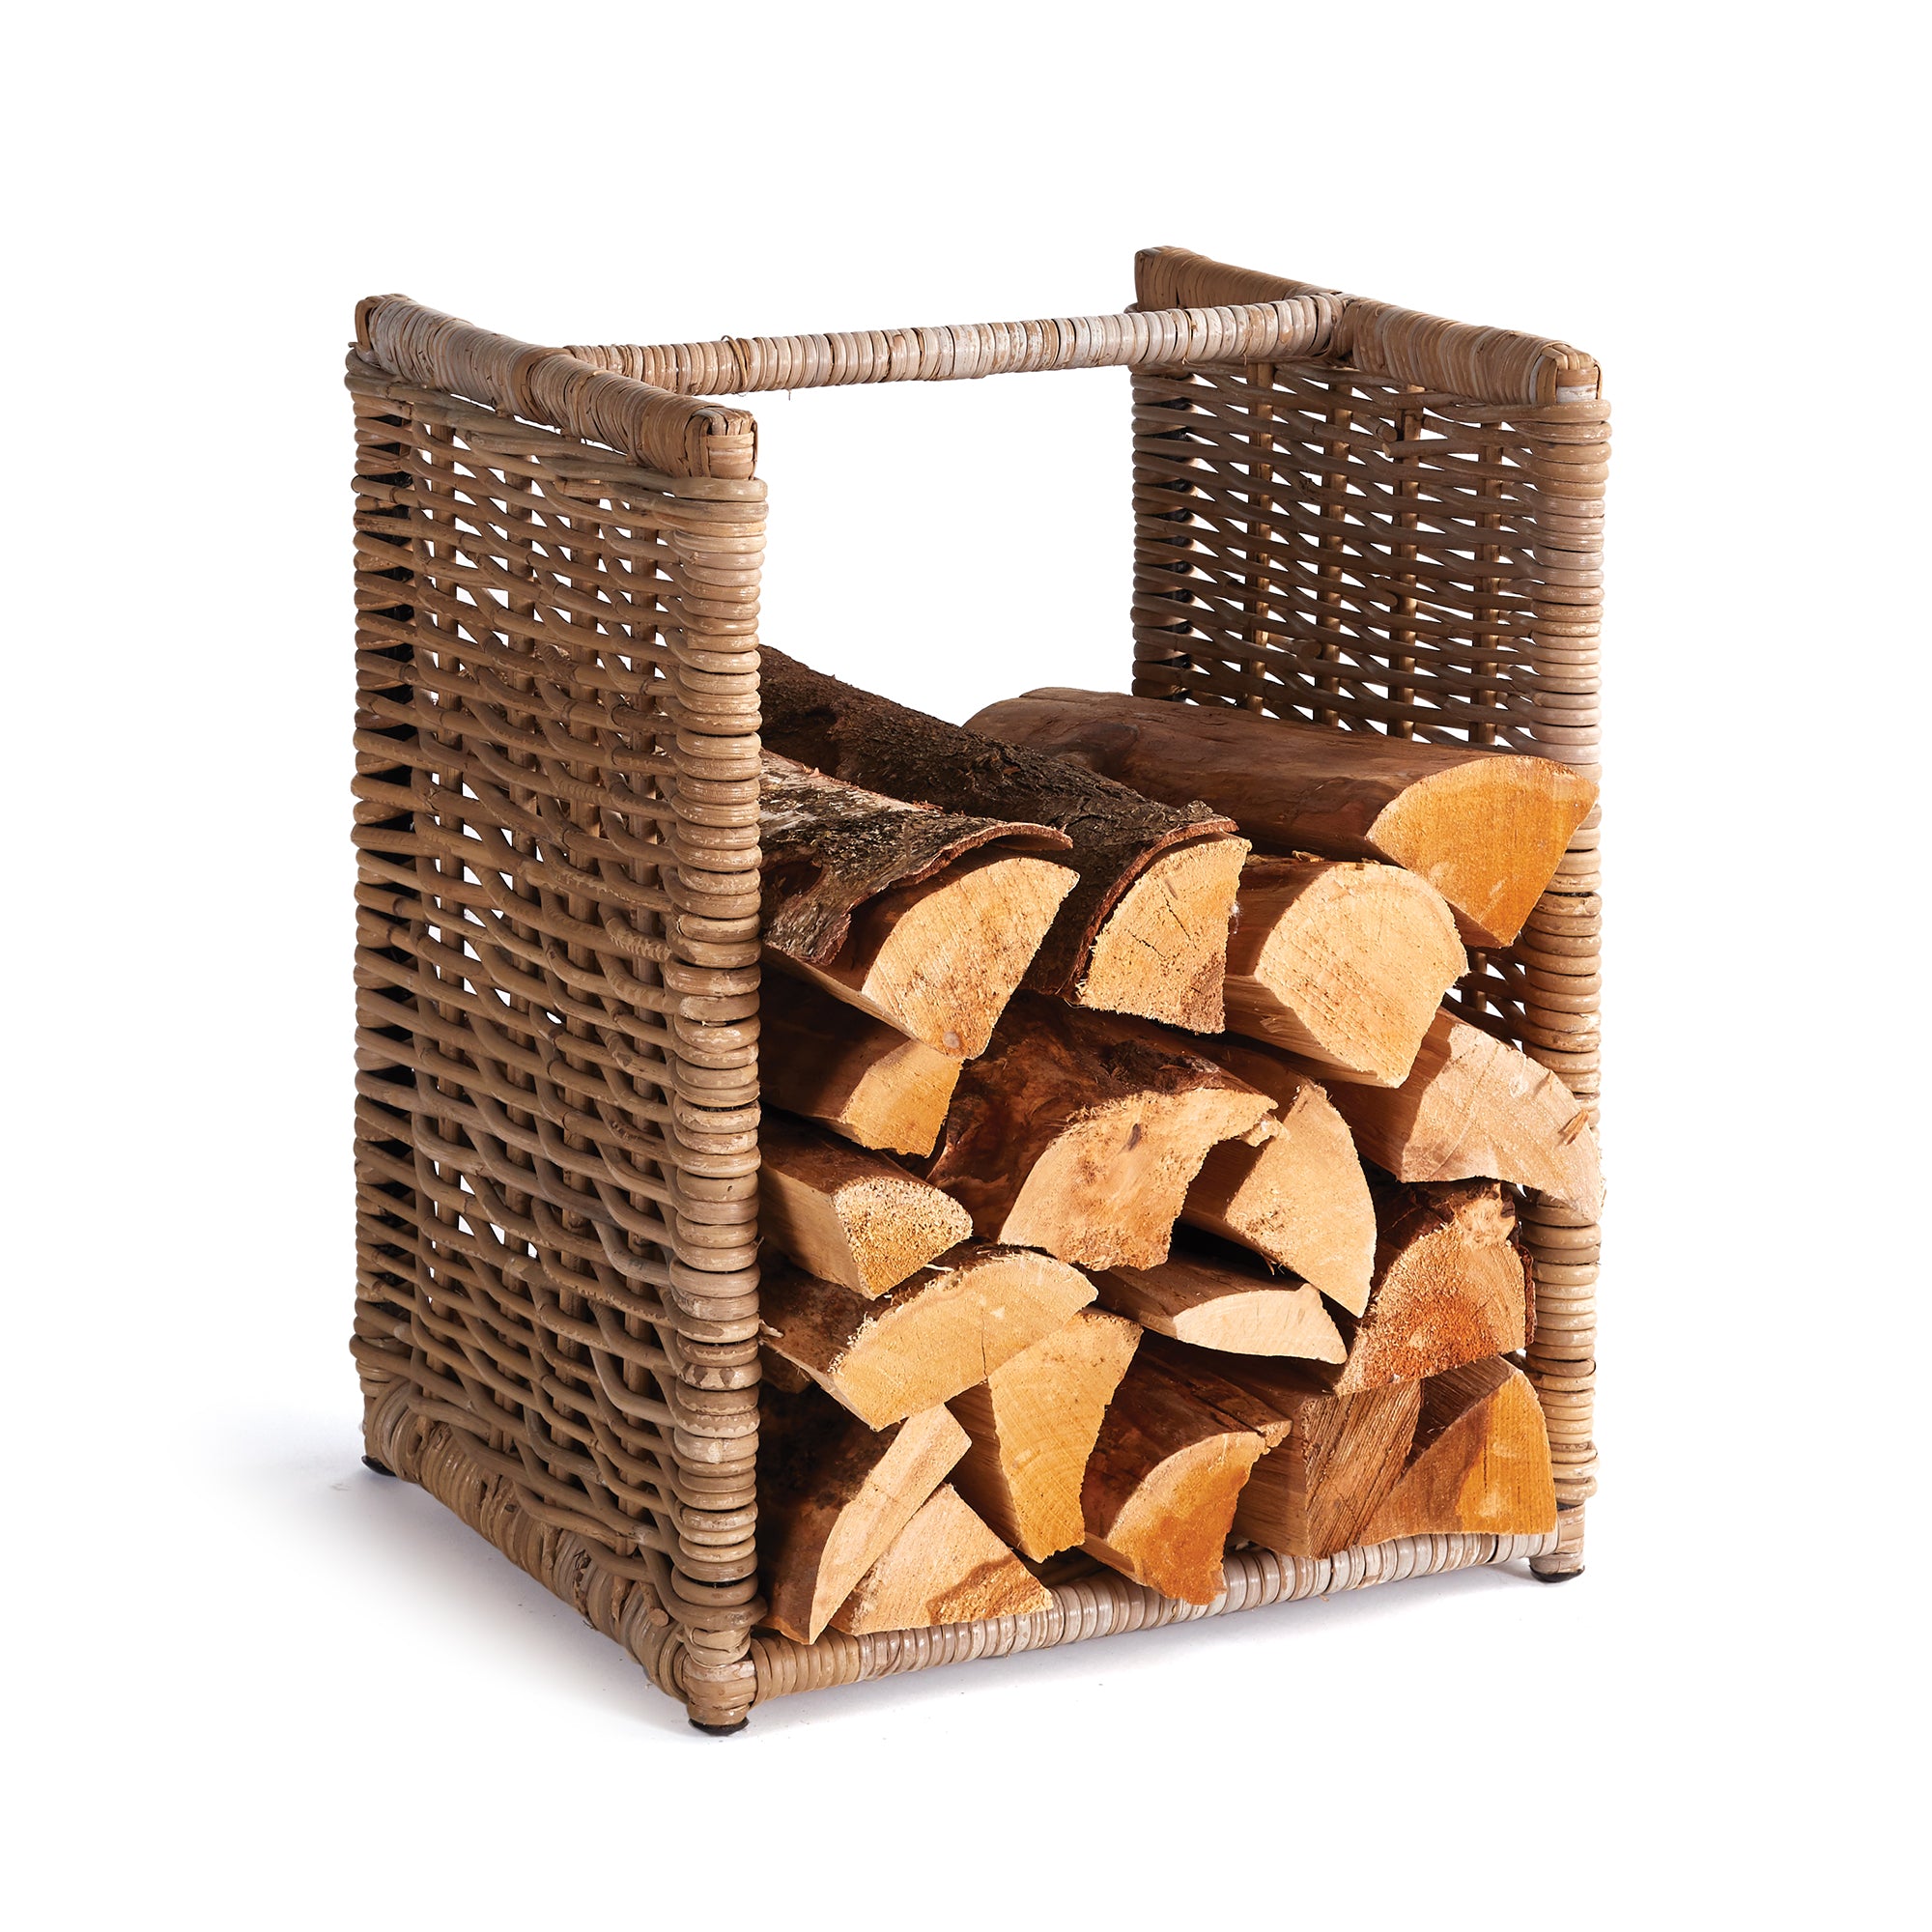 The wide, structured shape of this basket is ideal for the stack of painstakingly chopped wood logs. Place next to the hearth for a stylish, functional accent. Amethyst Home provides interior design, new construction, custom furniture, and area rugs in the Portland metro area.